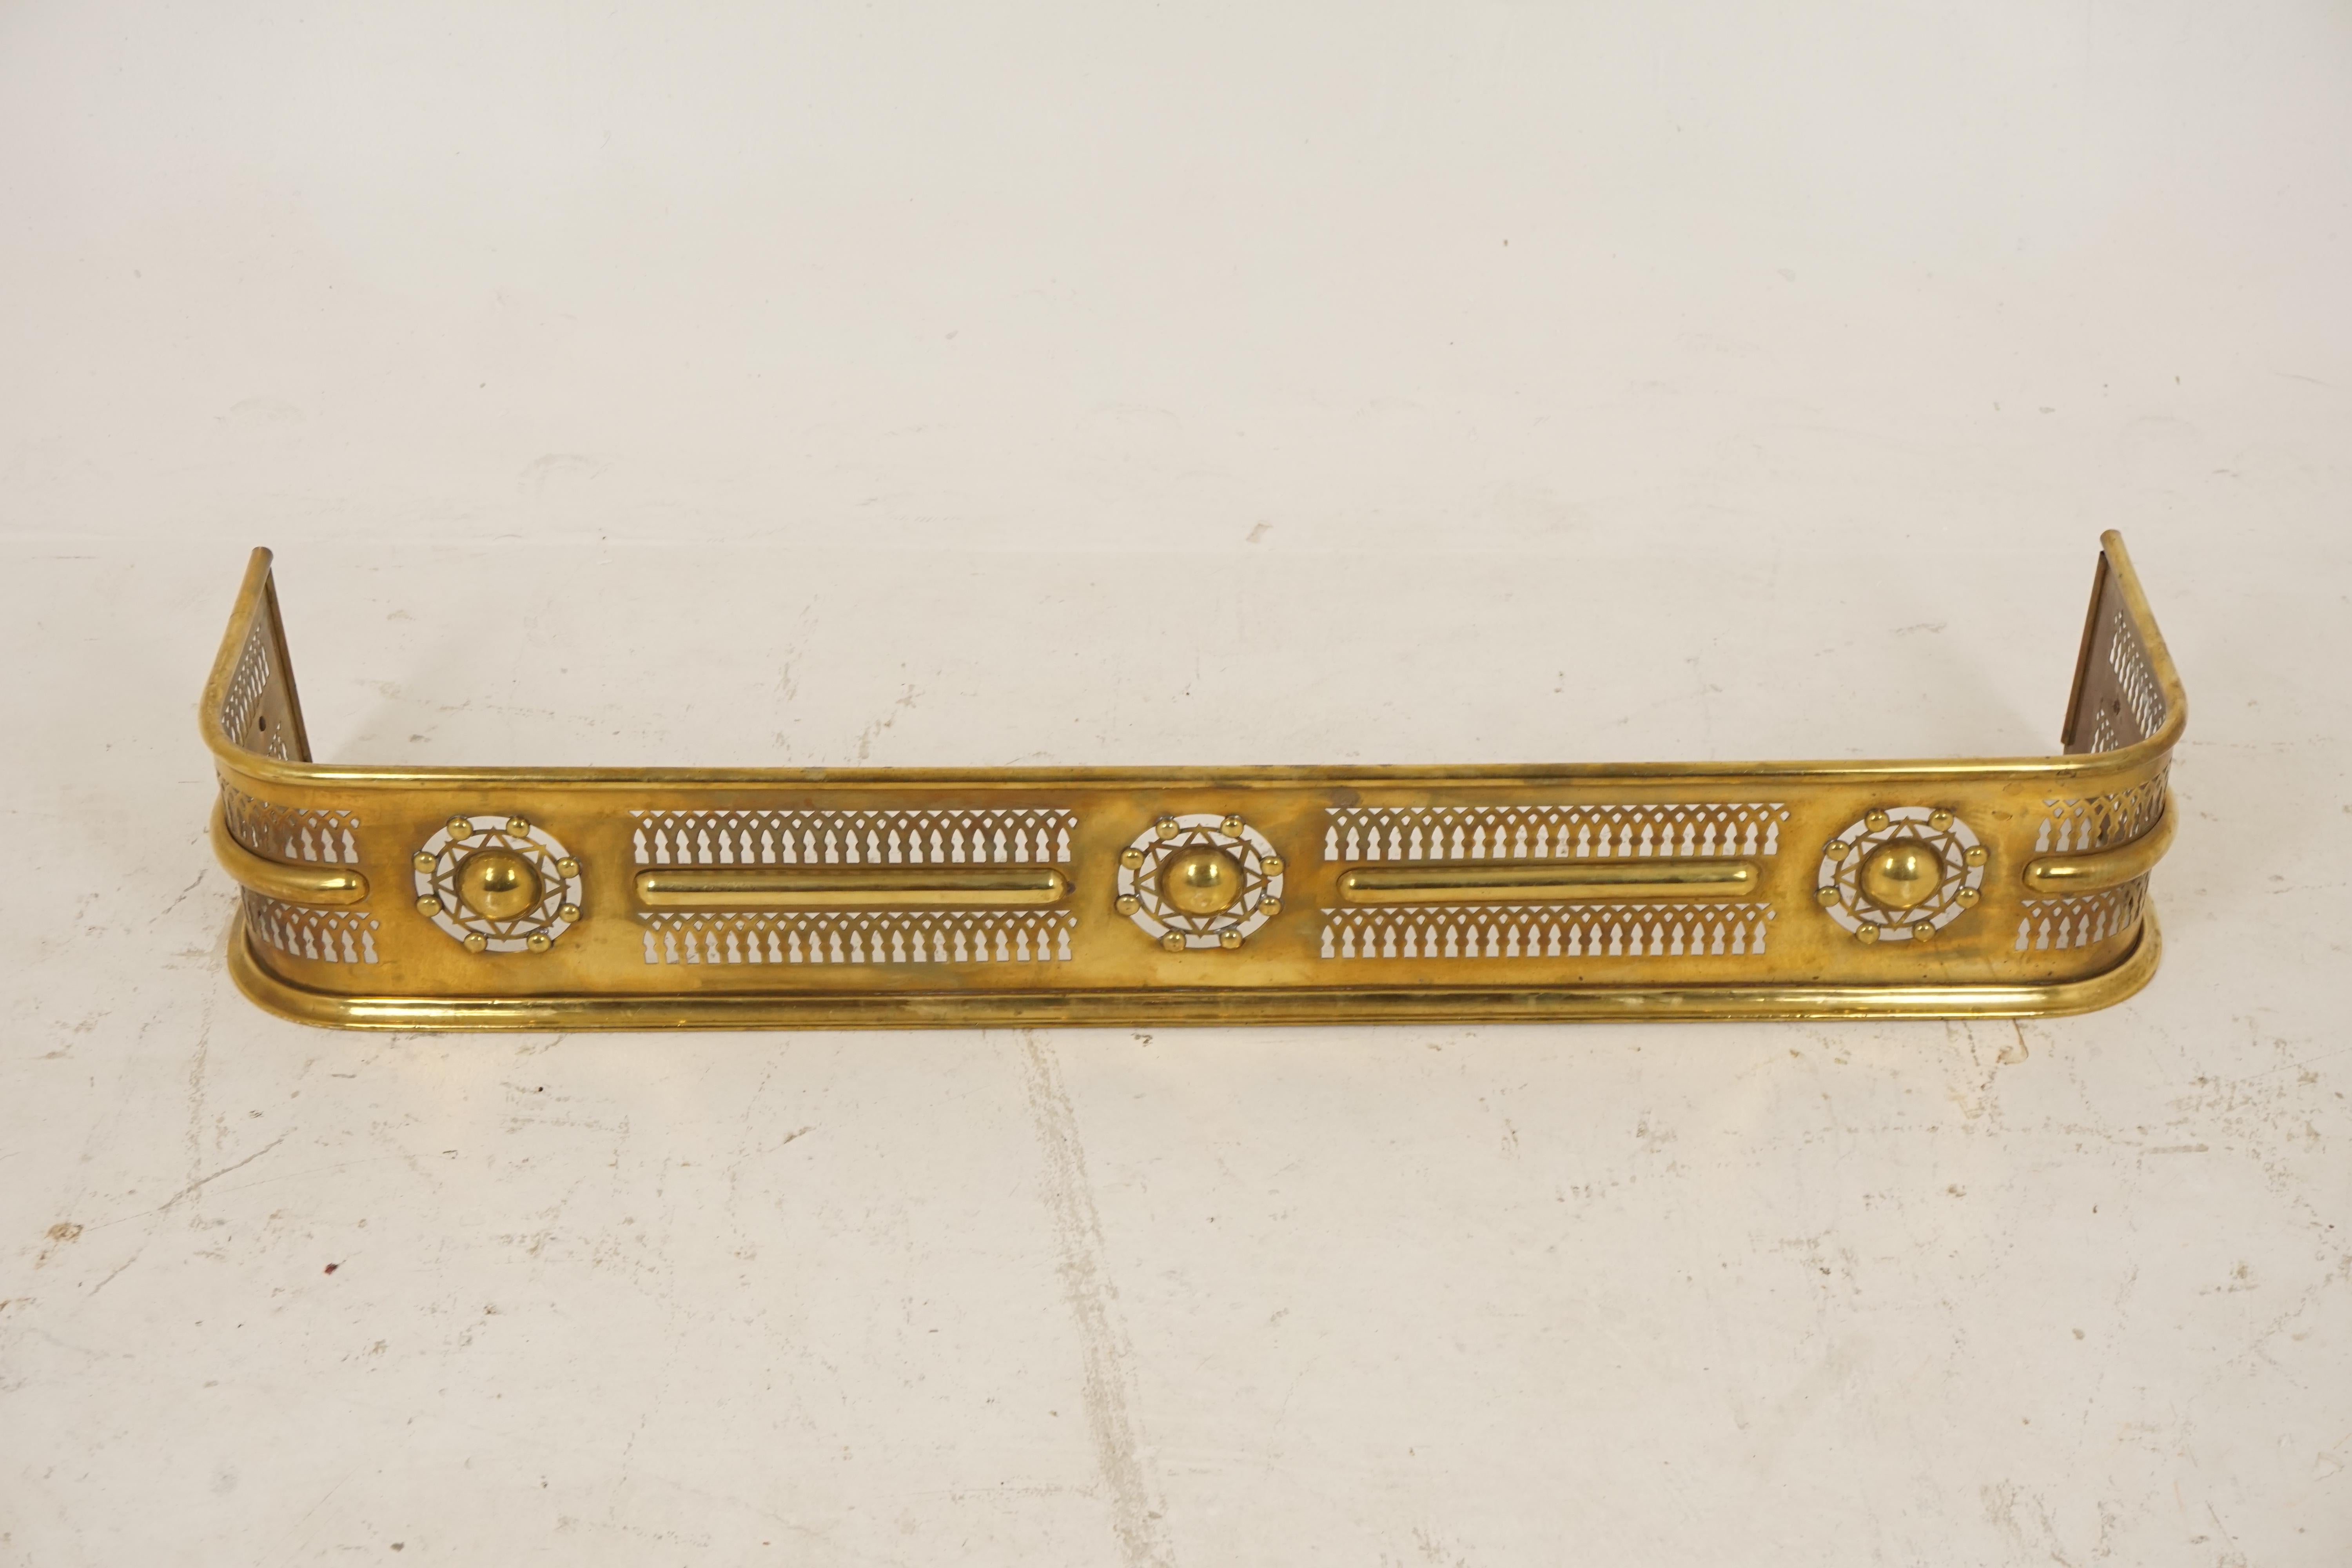 Antique brass fireplace surround, fender hearth guard, Scotland 1900, B2095

Scotland 1900
Brass
Pierced front with three circular motifs
Rounded ends
Wonderful brass embellishments
Signs of use and wear 



Measures: 47.5